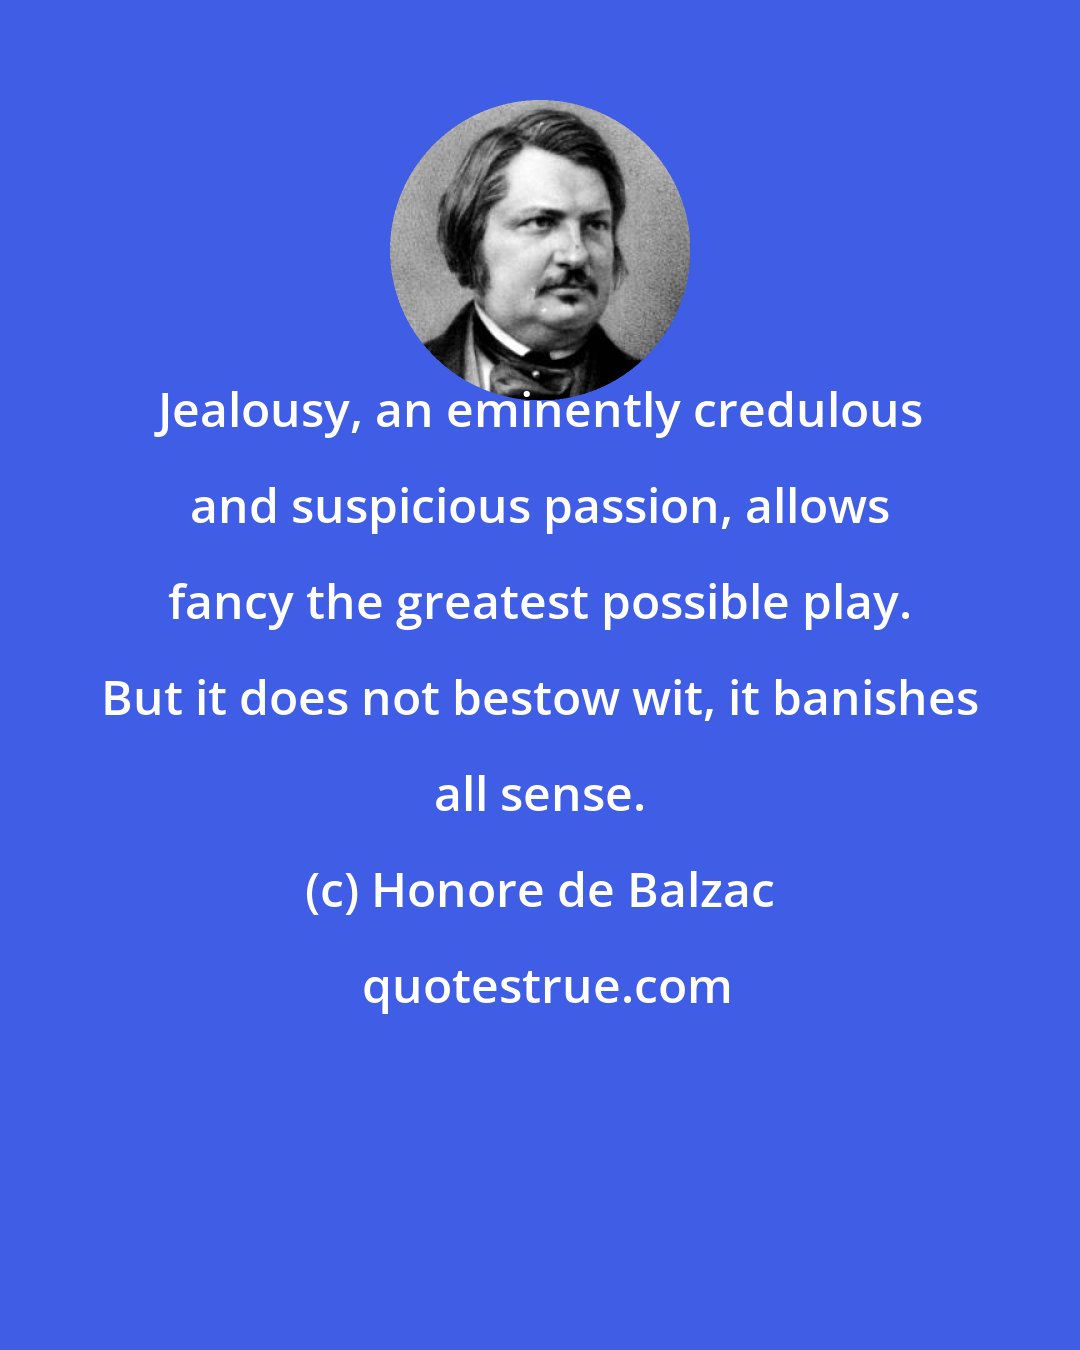 Honore de Balzac: Jealousy, an eminently credulous and suspicious passion, allows fancy the greatest possible play. But it does not bestow wit, it banishes all sense.